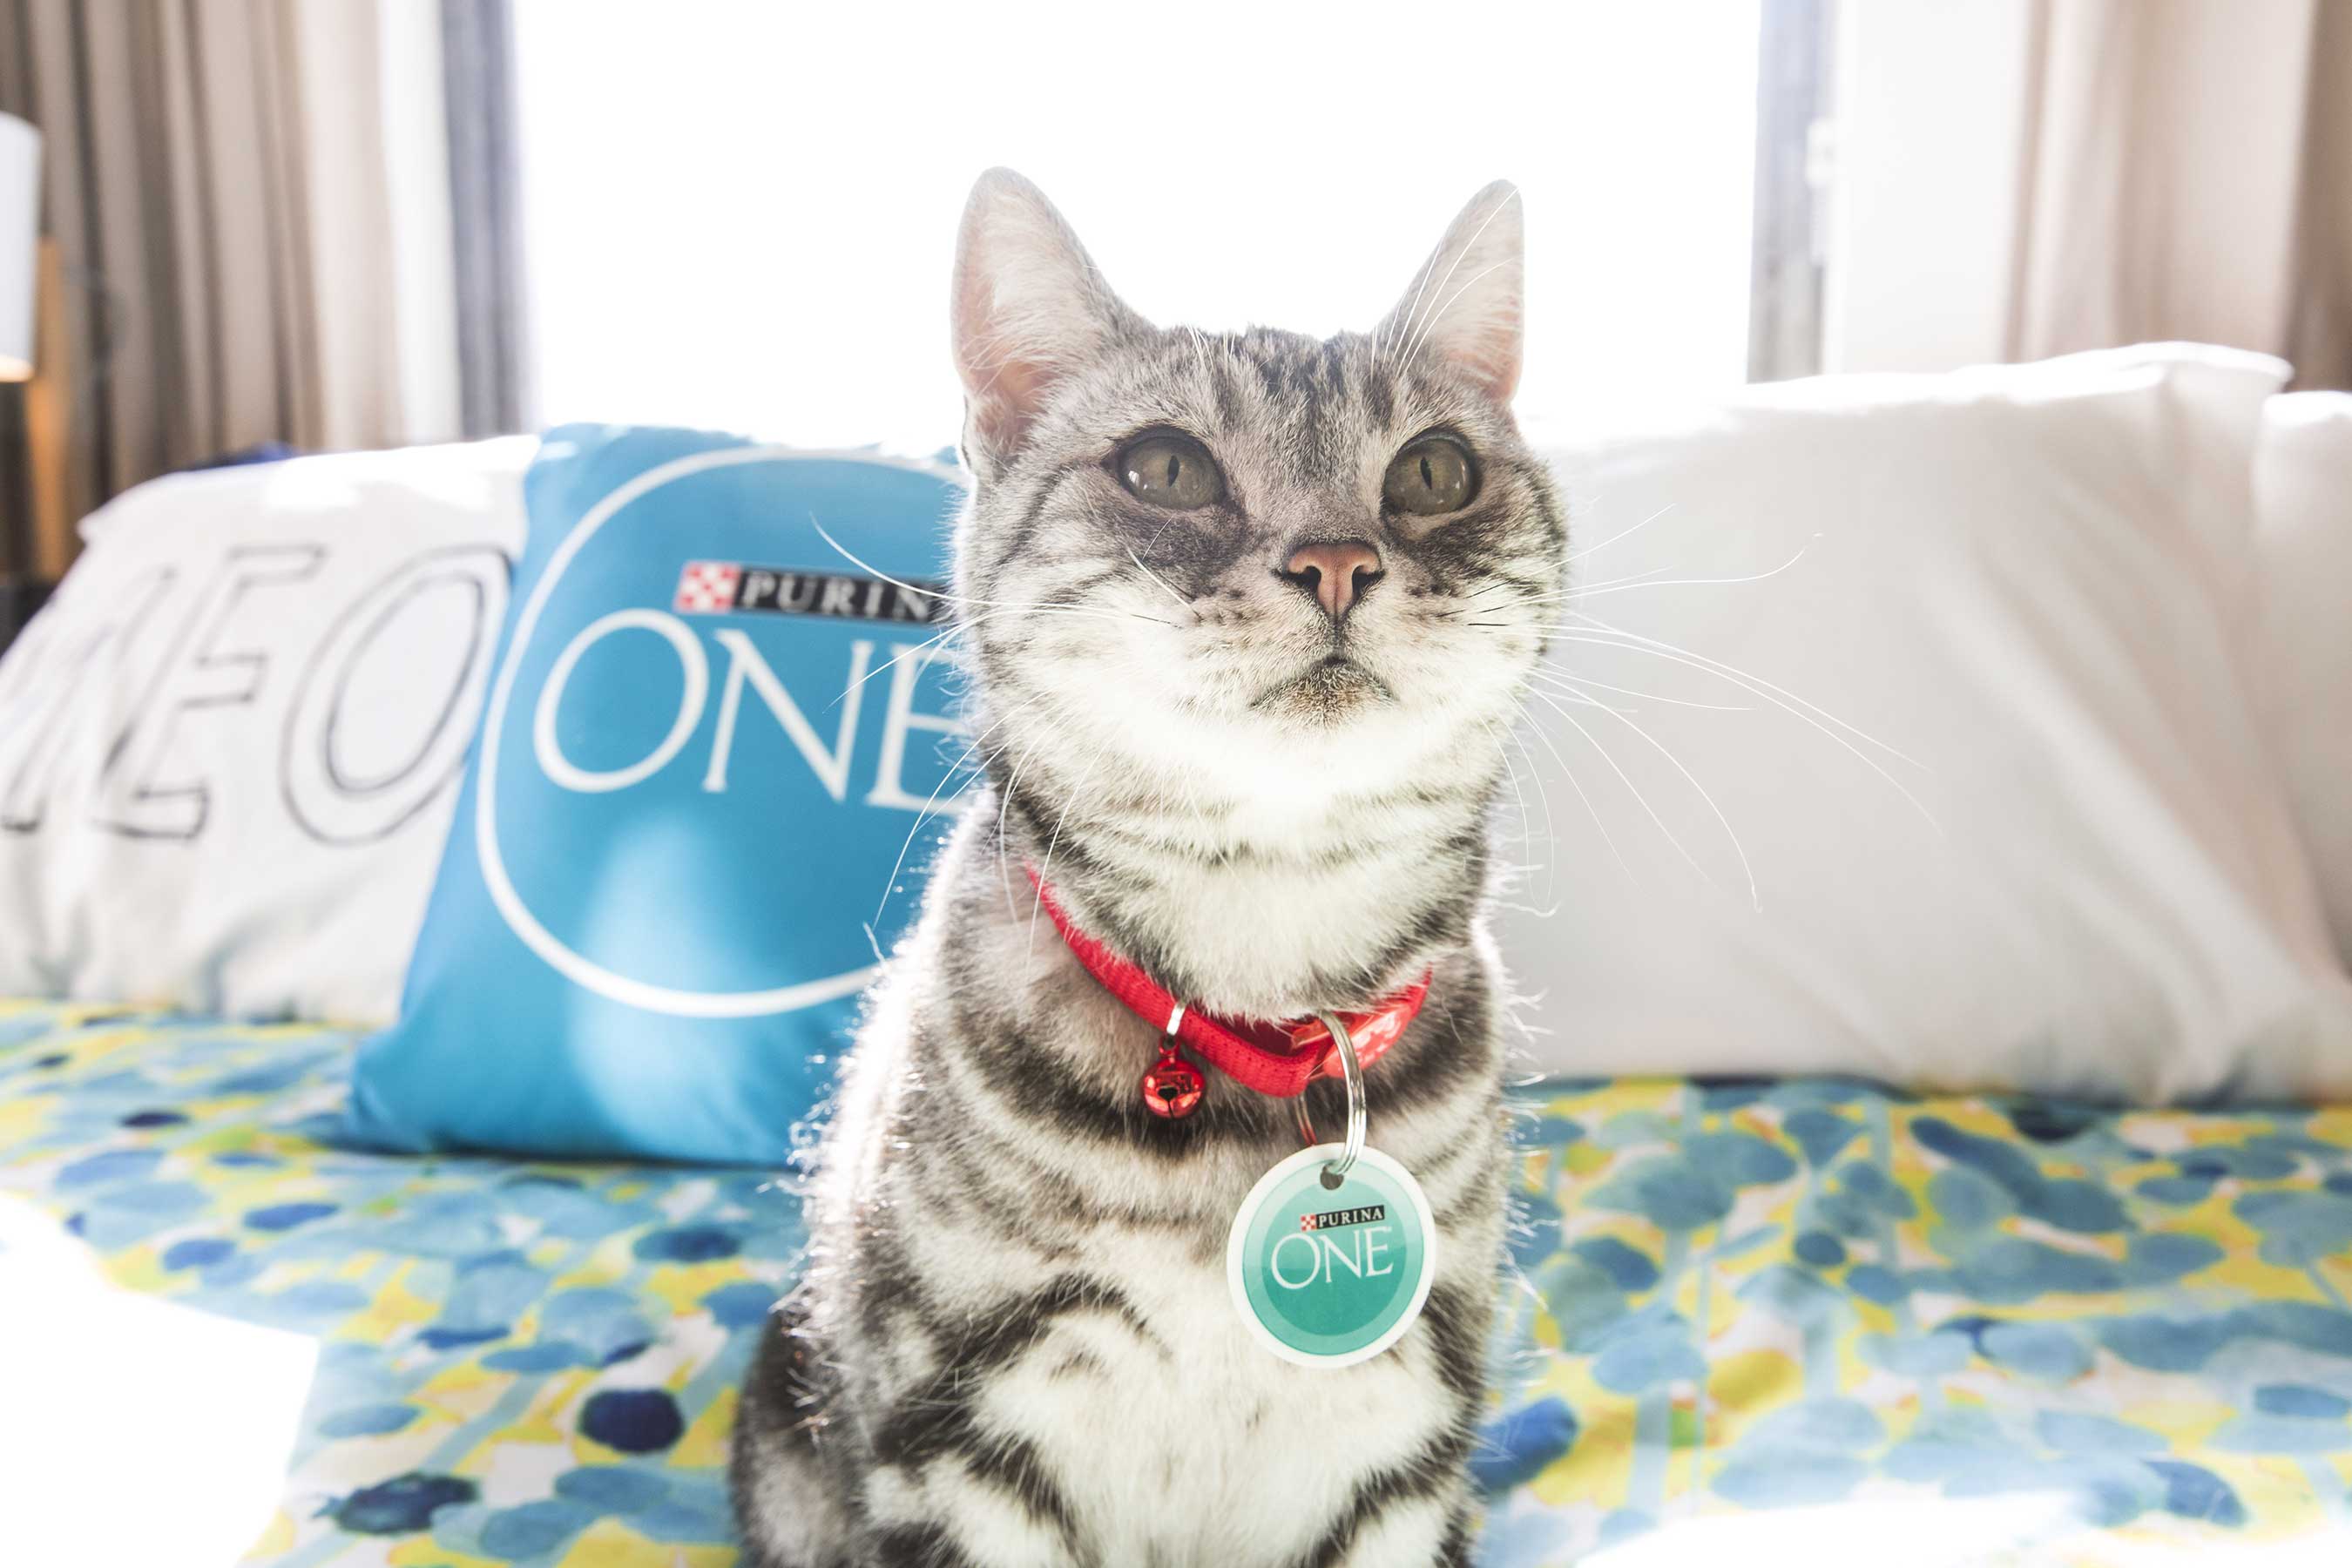 Cats will greet guests of Purina ONE’s Whole Body Health Hotel. Designed to coincide with CatConLA, the hotel immerses guests in a hotel environment well-appointed with cat-themed amenities and cat health experts.